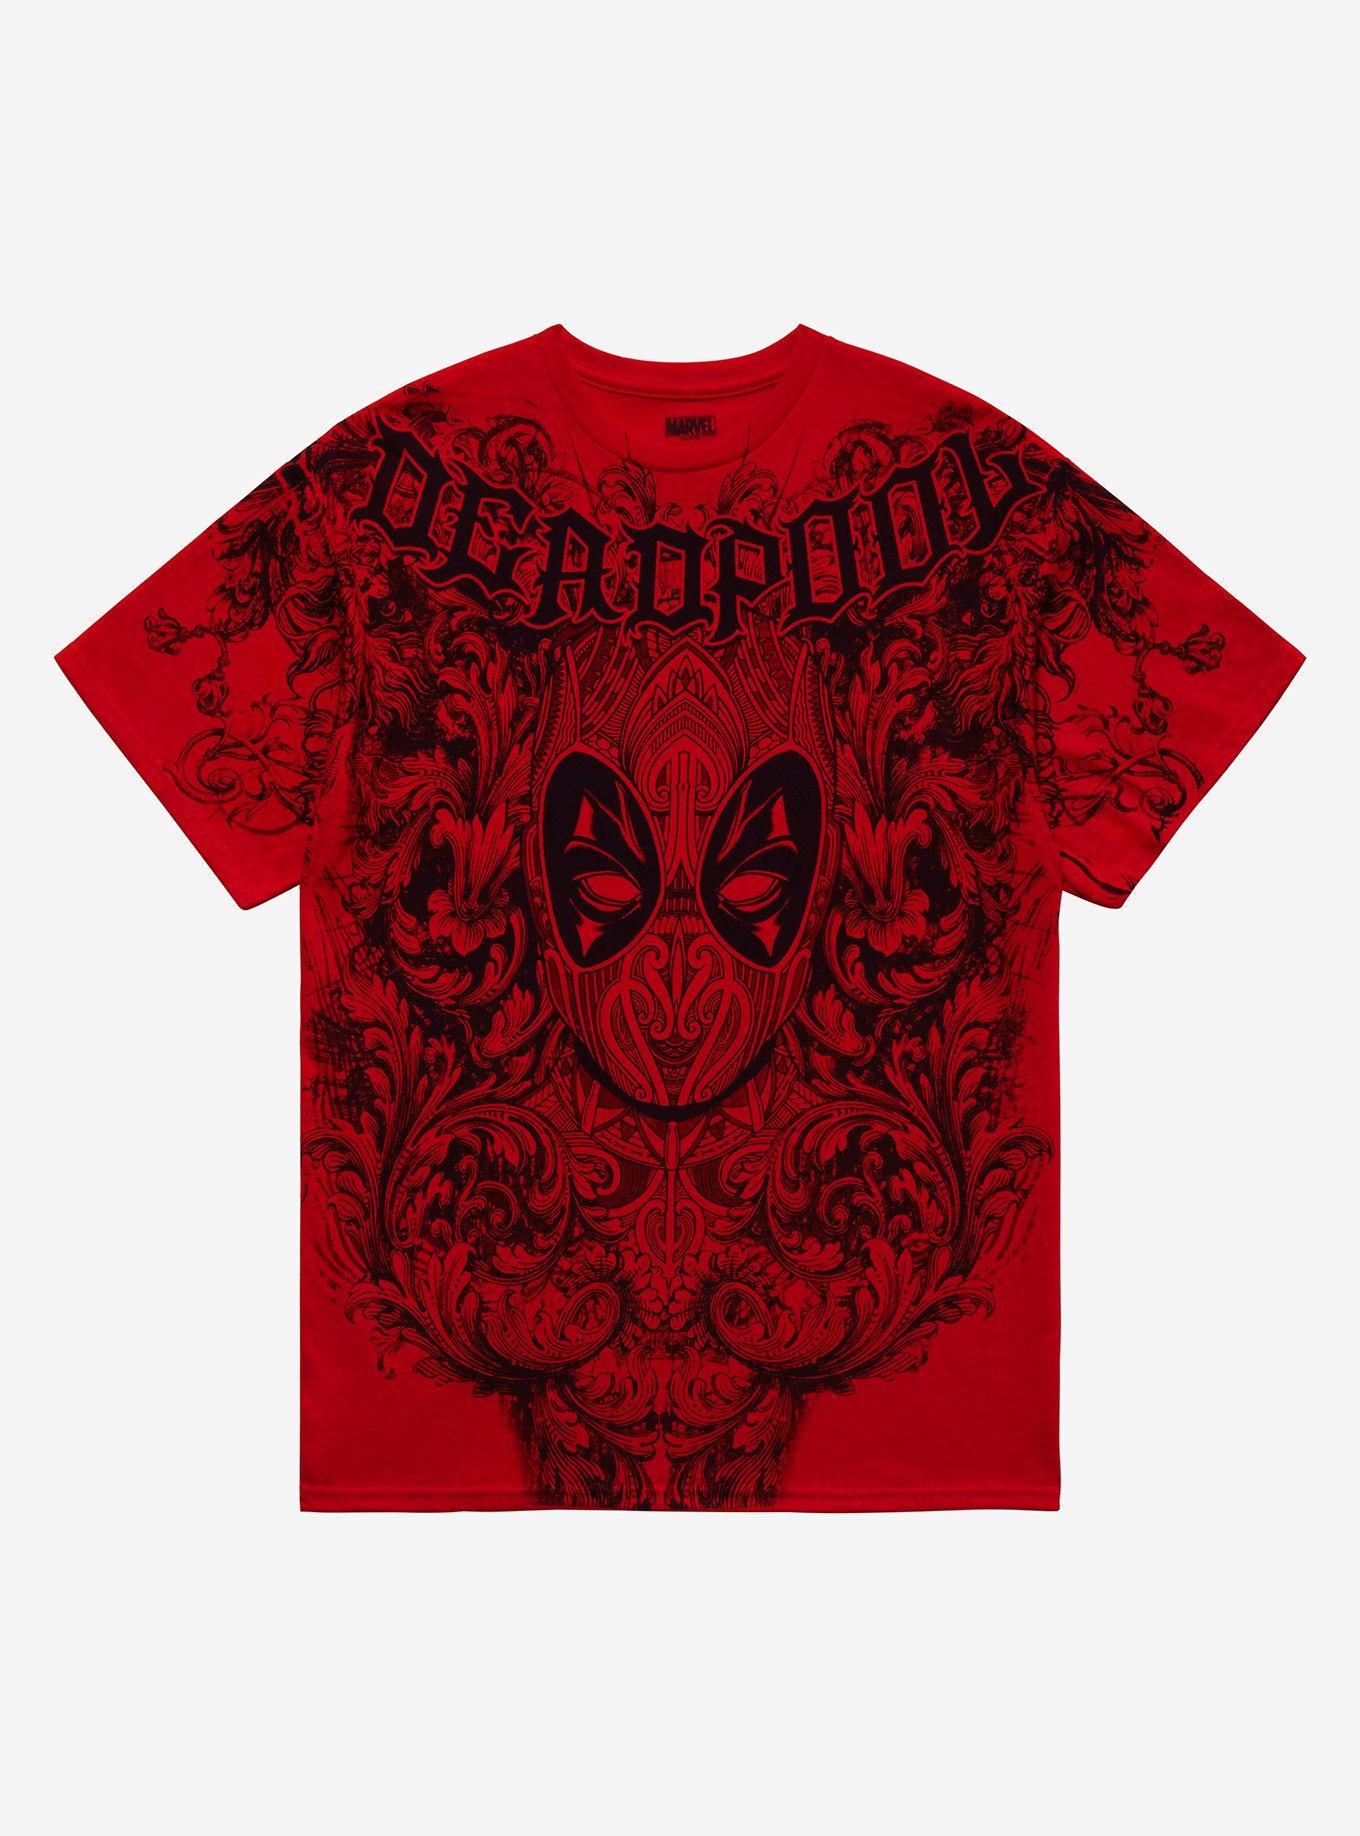 Buy Doll Haunt Couture deadpool Shirt High Fashion Doll Clothes